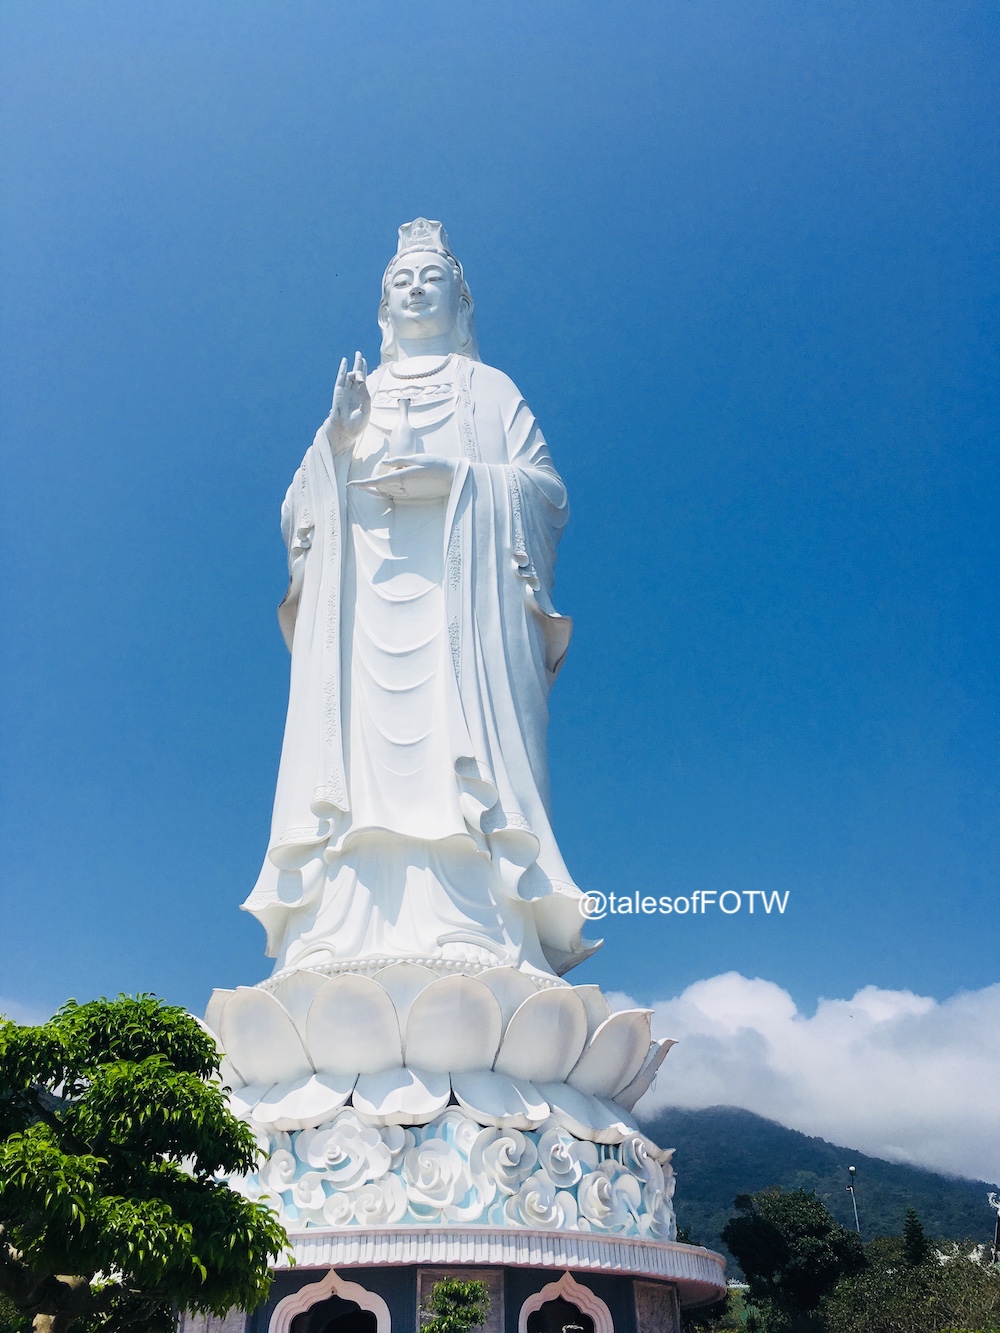 Looking to visit Vietnam or have a 24 hour hault at Da Nang? Then you're in one of the most beautiful place with pristine beaches #vietnam #DaNang #beaches #travel #Ladybuddha